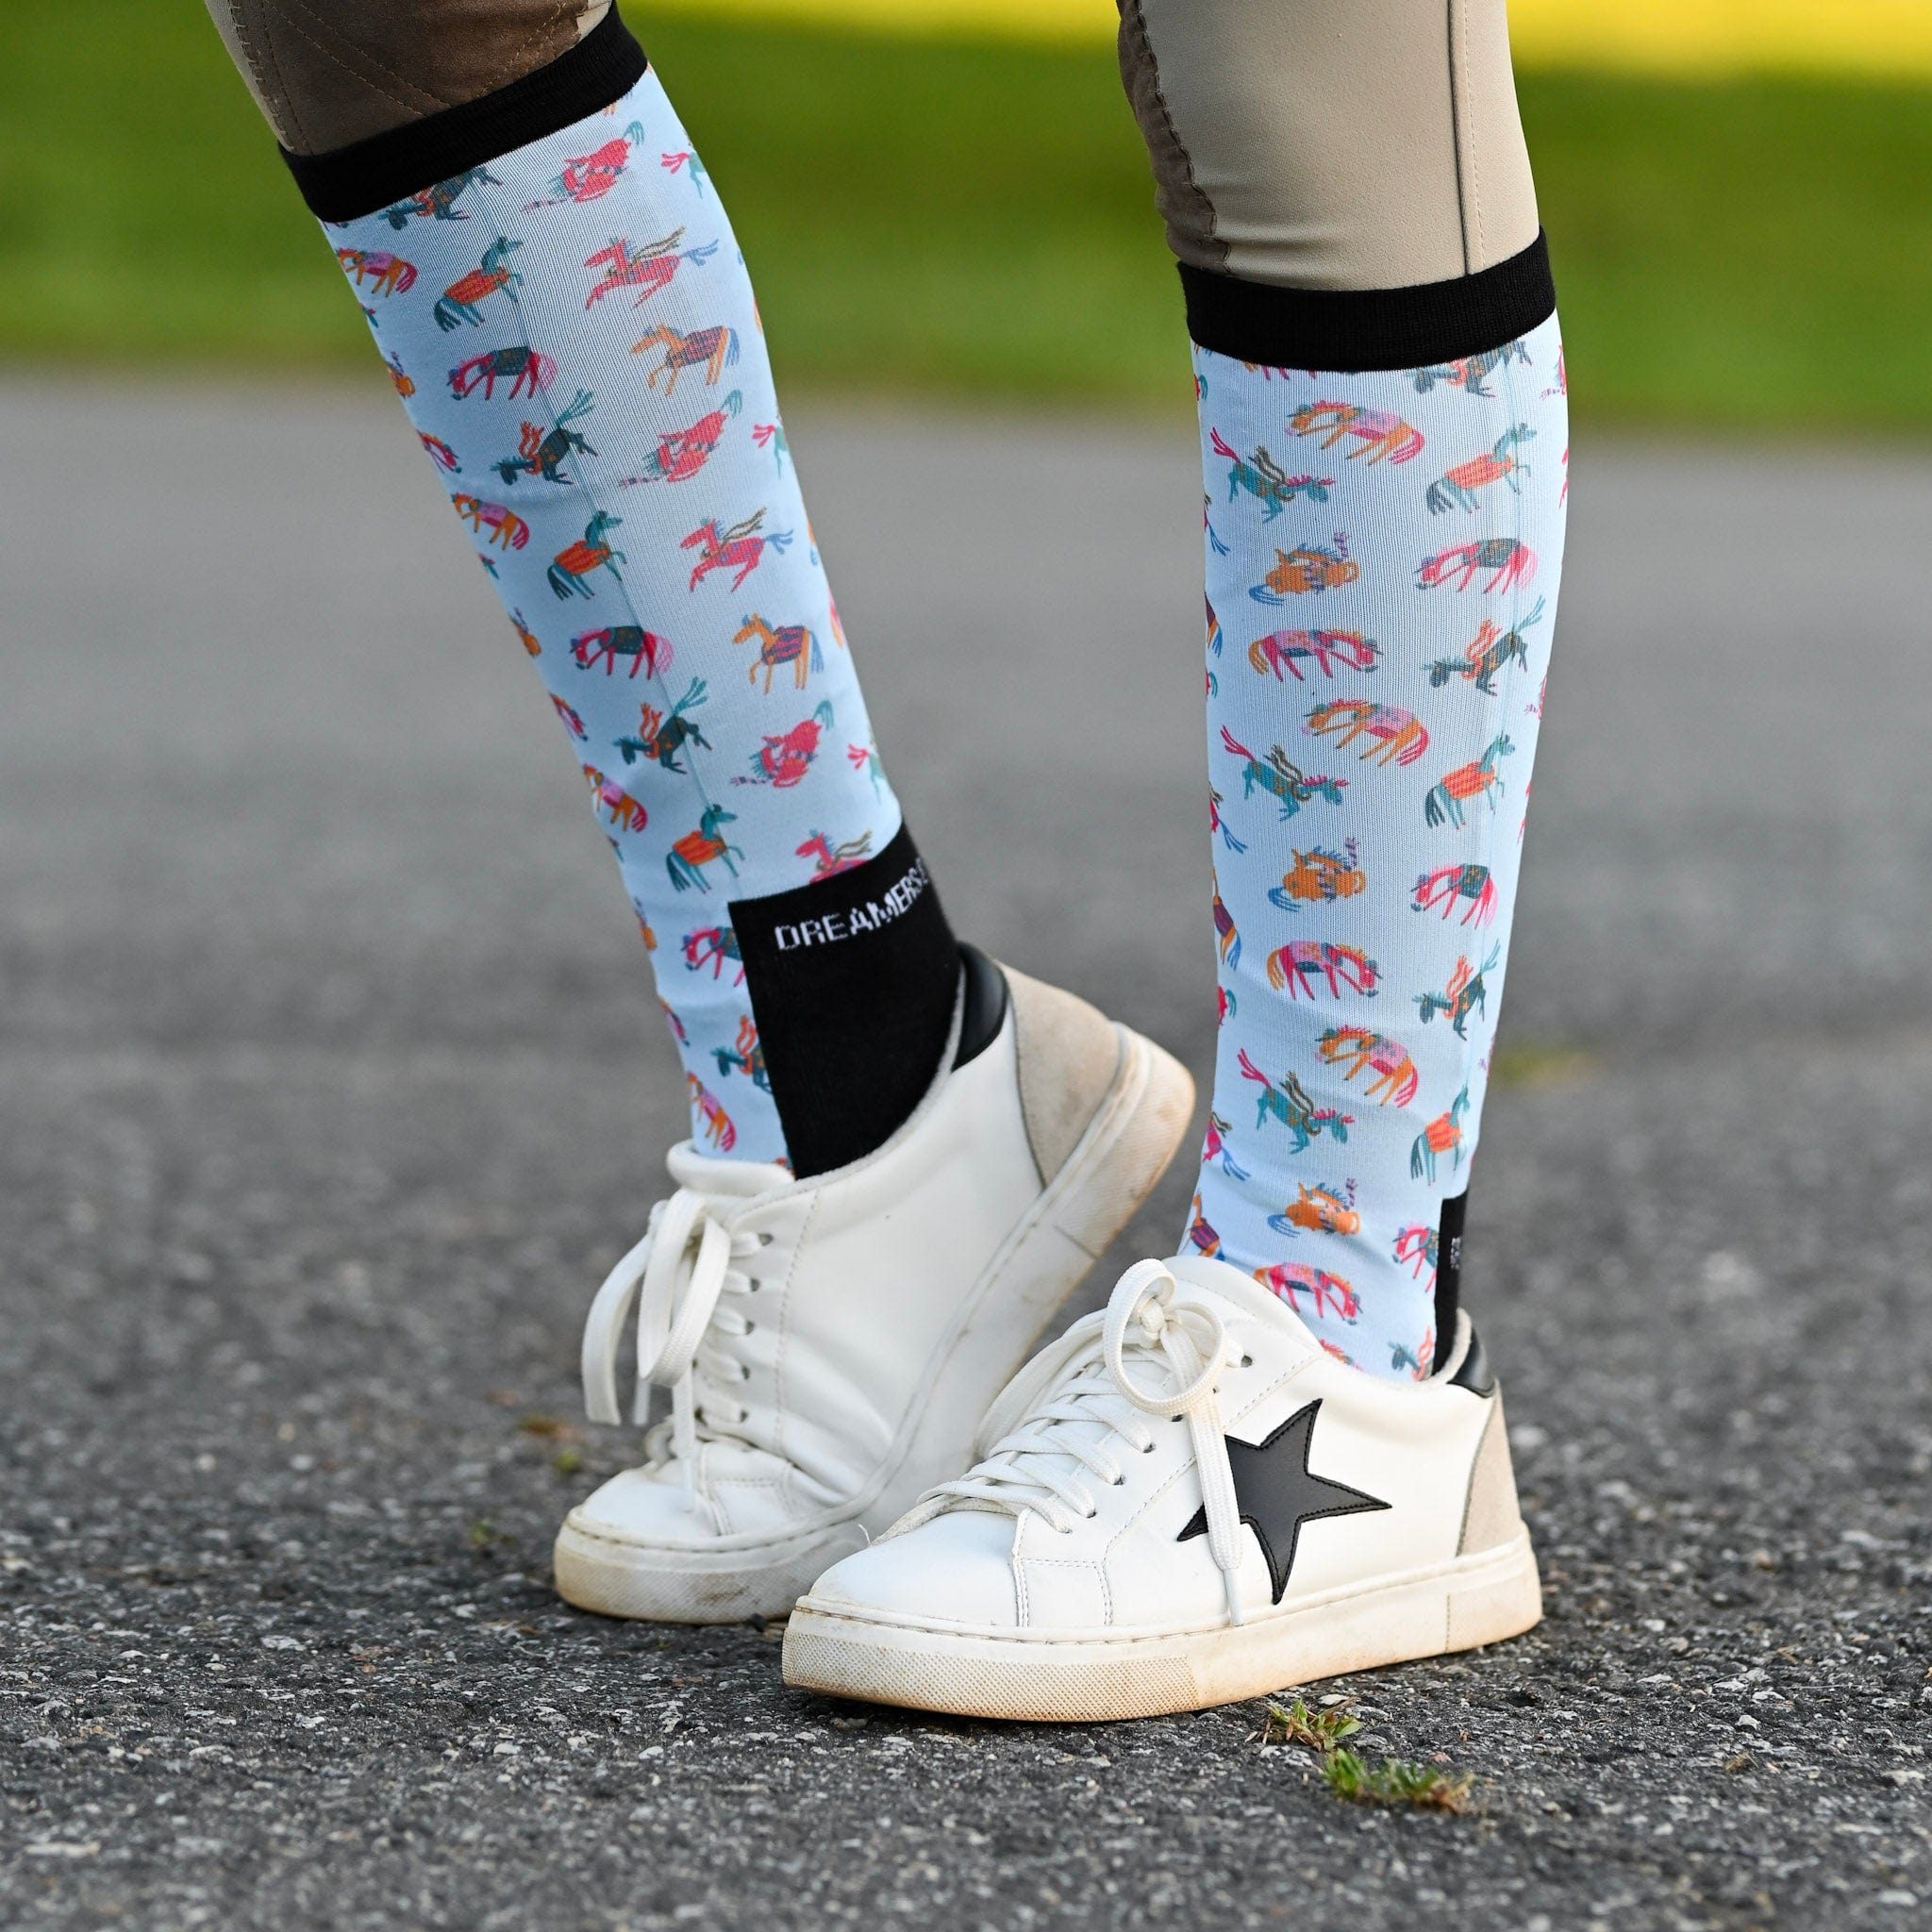 dreamers & schemers Youth Pair & a Spare Light Jacket Youth Pair & a Spare equestrian boot socks boot socks thin socks riding socks pattern socks tall socks funny socks knee high socks horse socks horse show socks